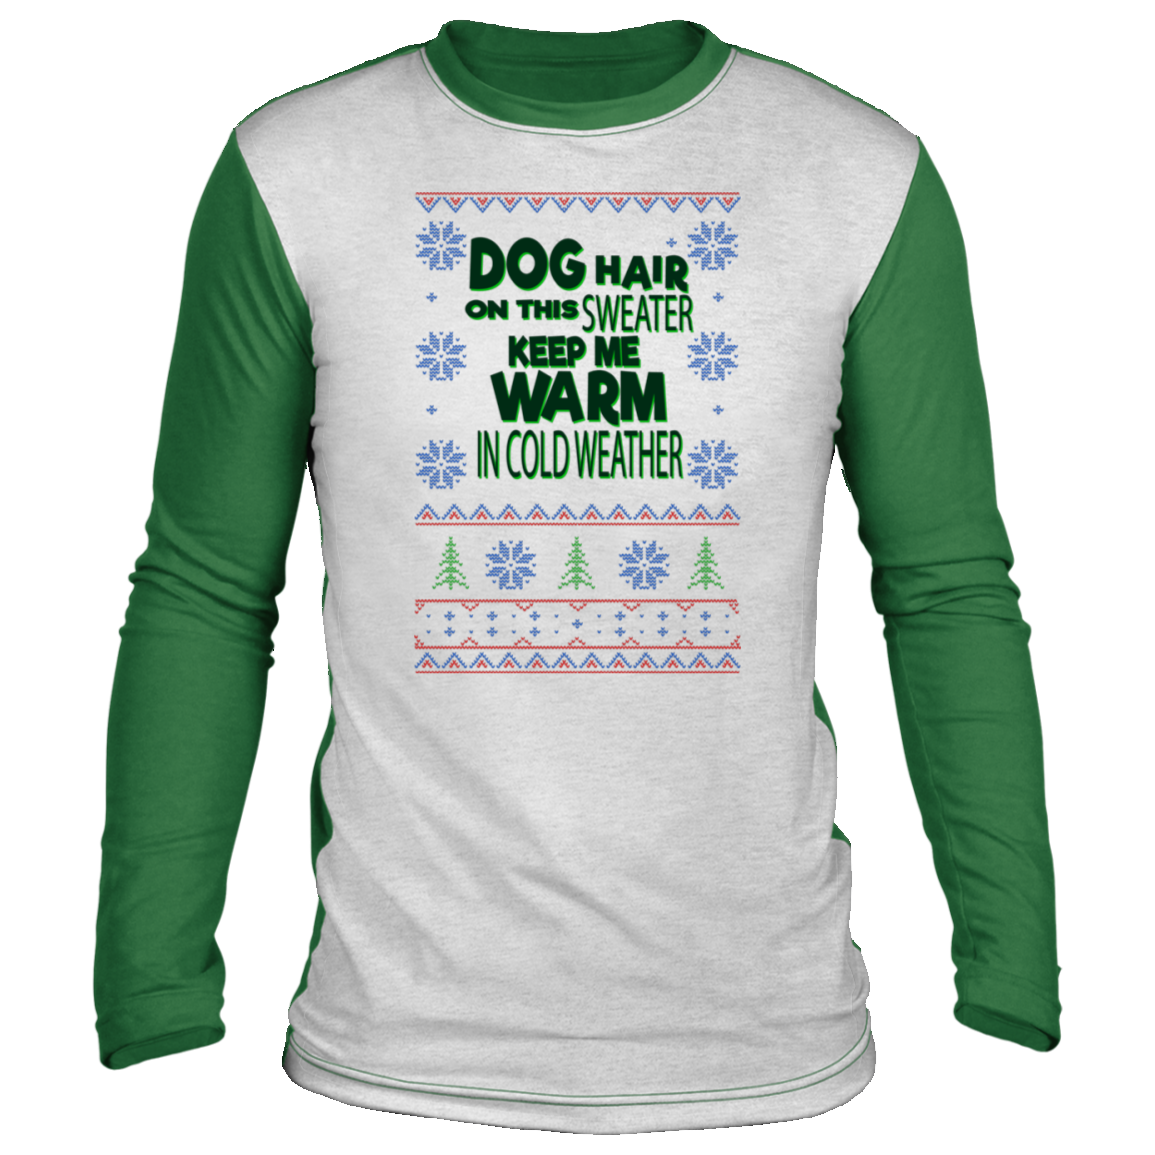 Dog Hair On This Sweater Keep Me Warm in Cold Weather,  Christmas ‘sweater’ Long Sleeve - GoneBold.gift